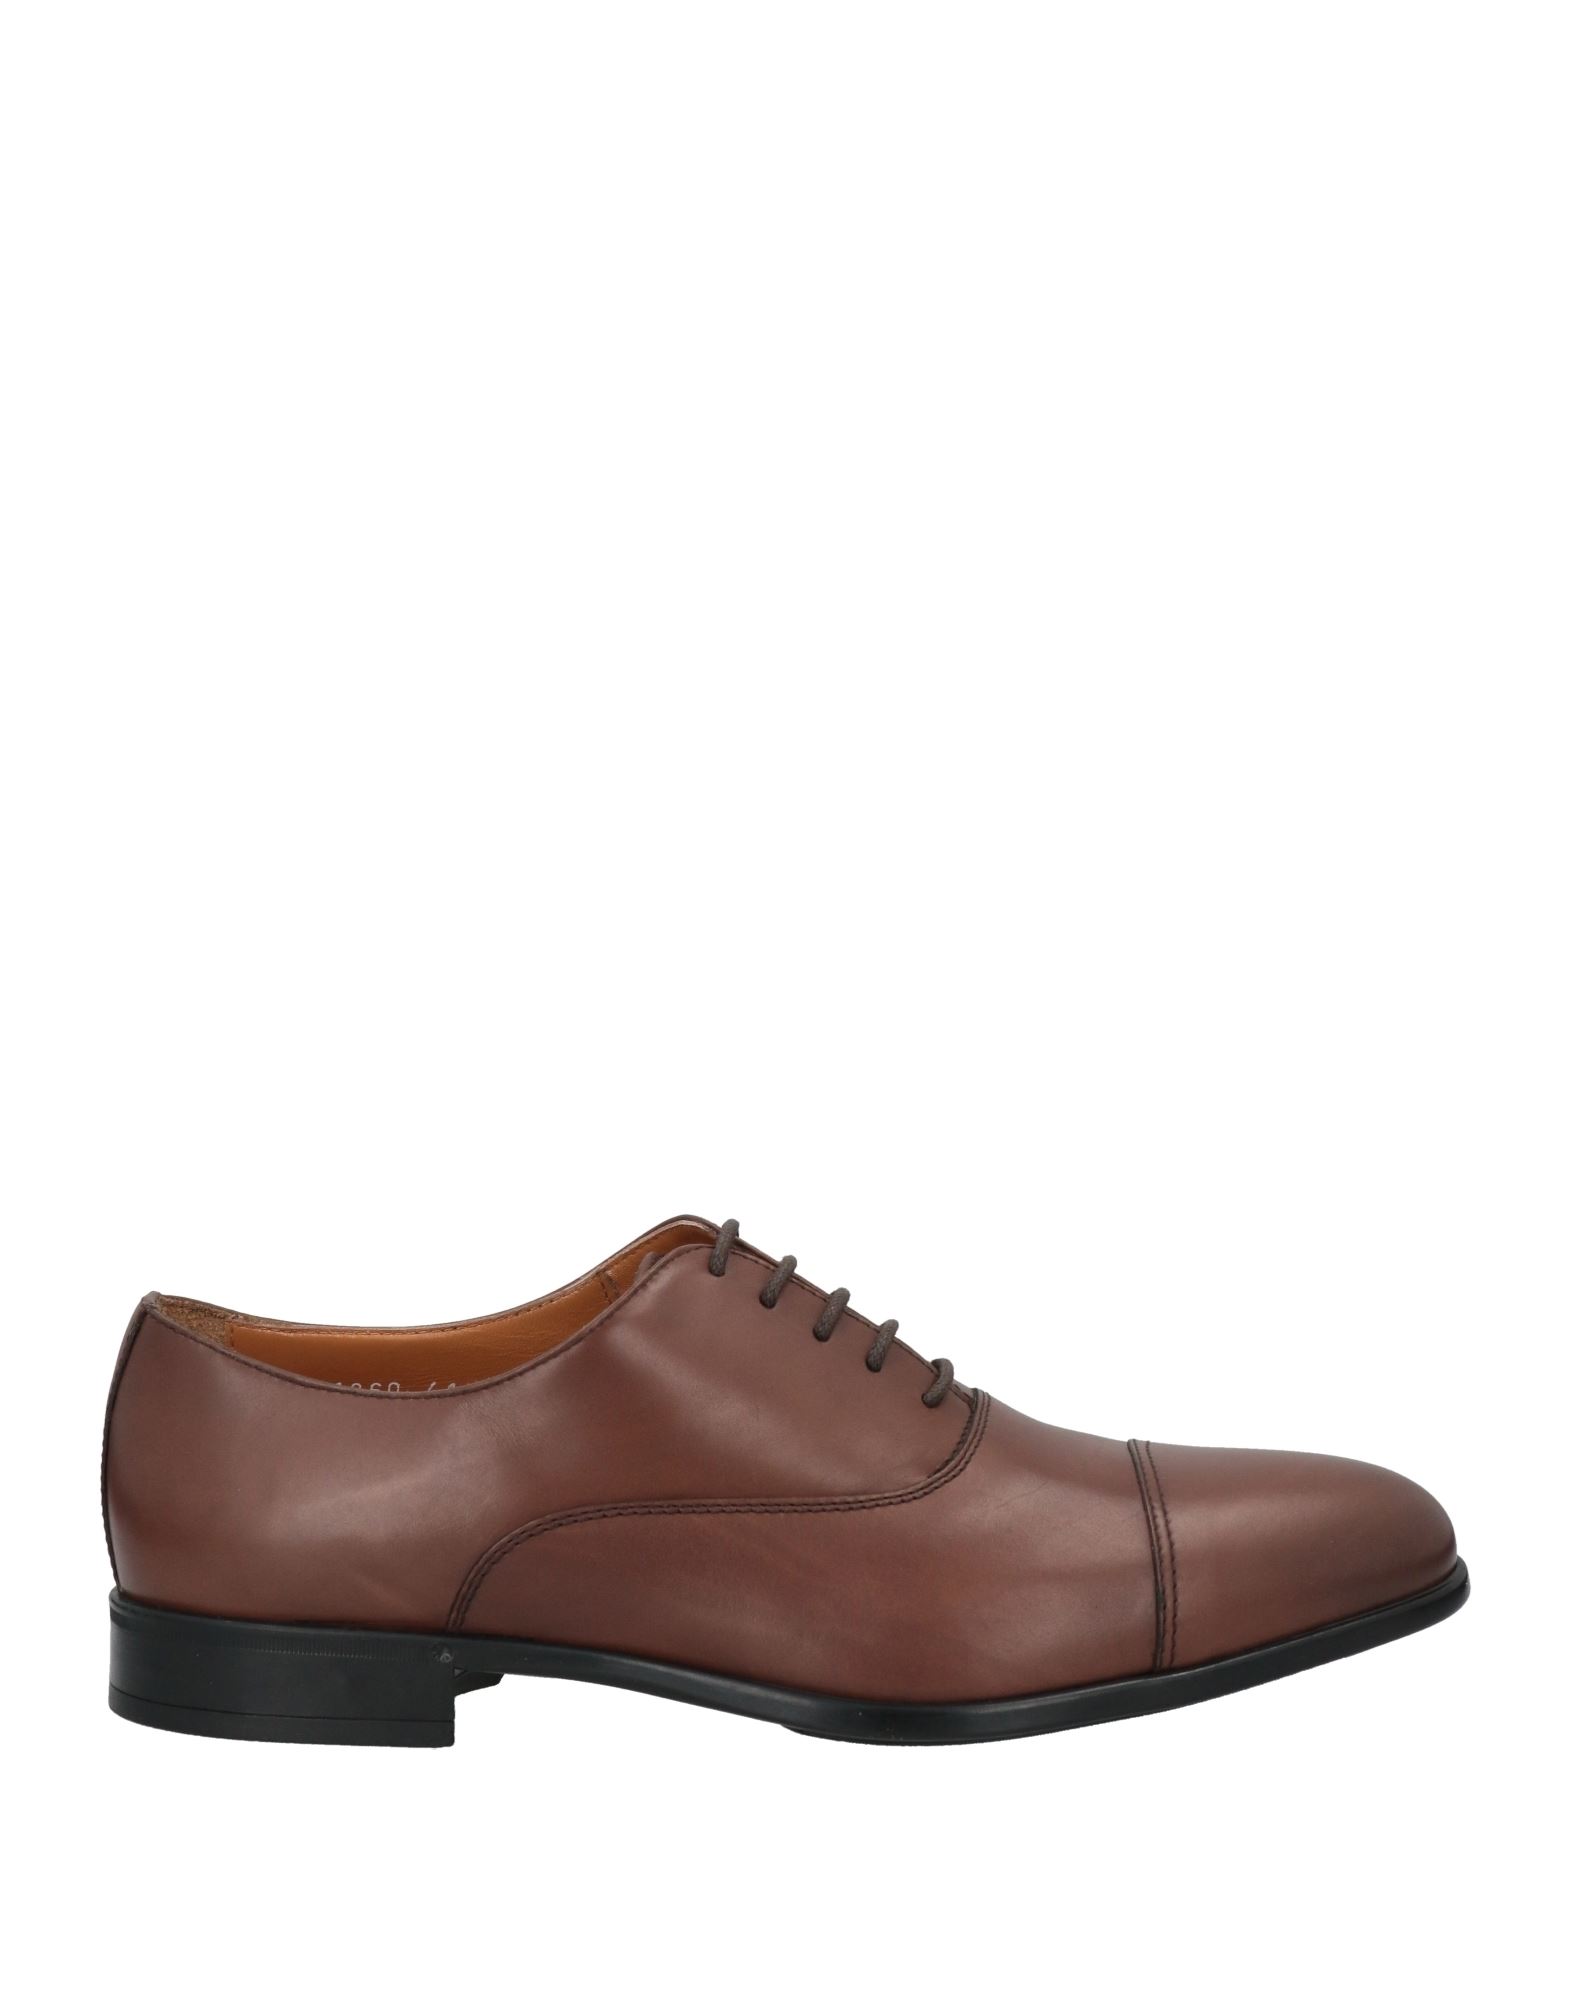 Doucal's Man Lace-up Shoes Brown Size 9 Calfskin